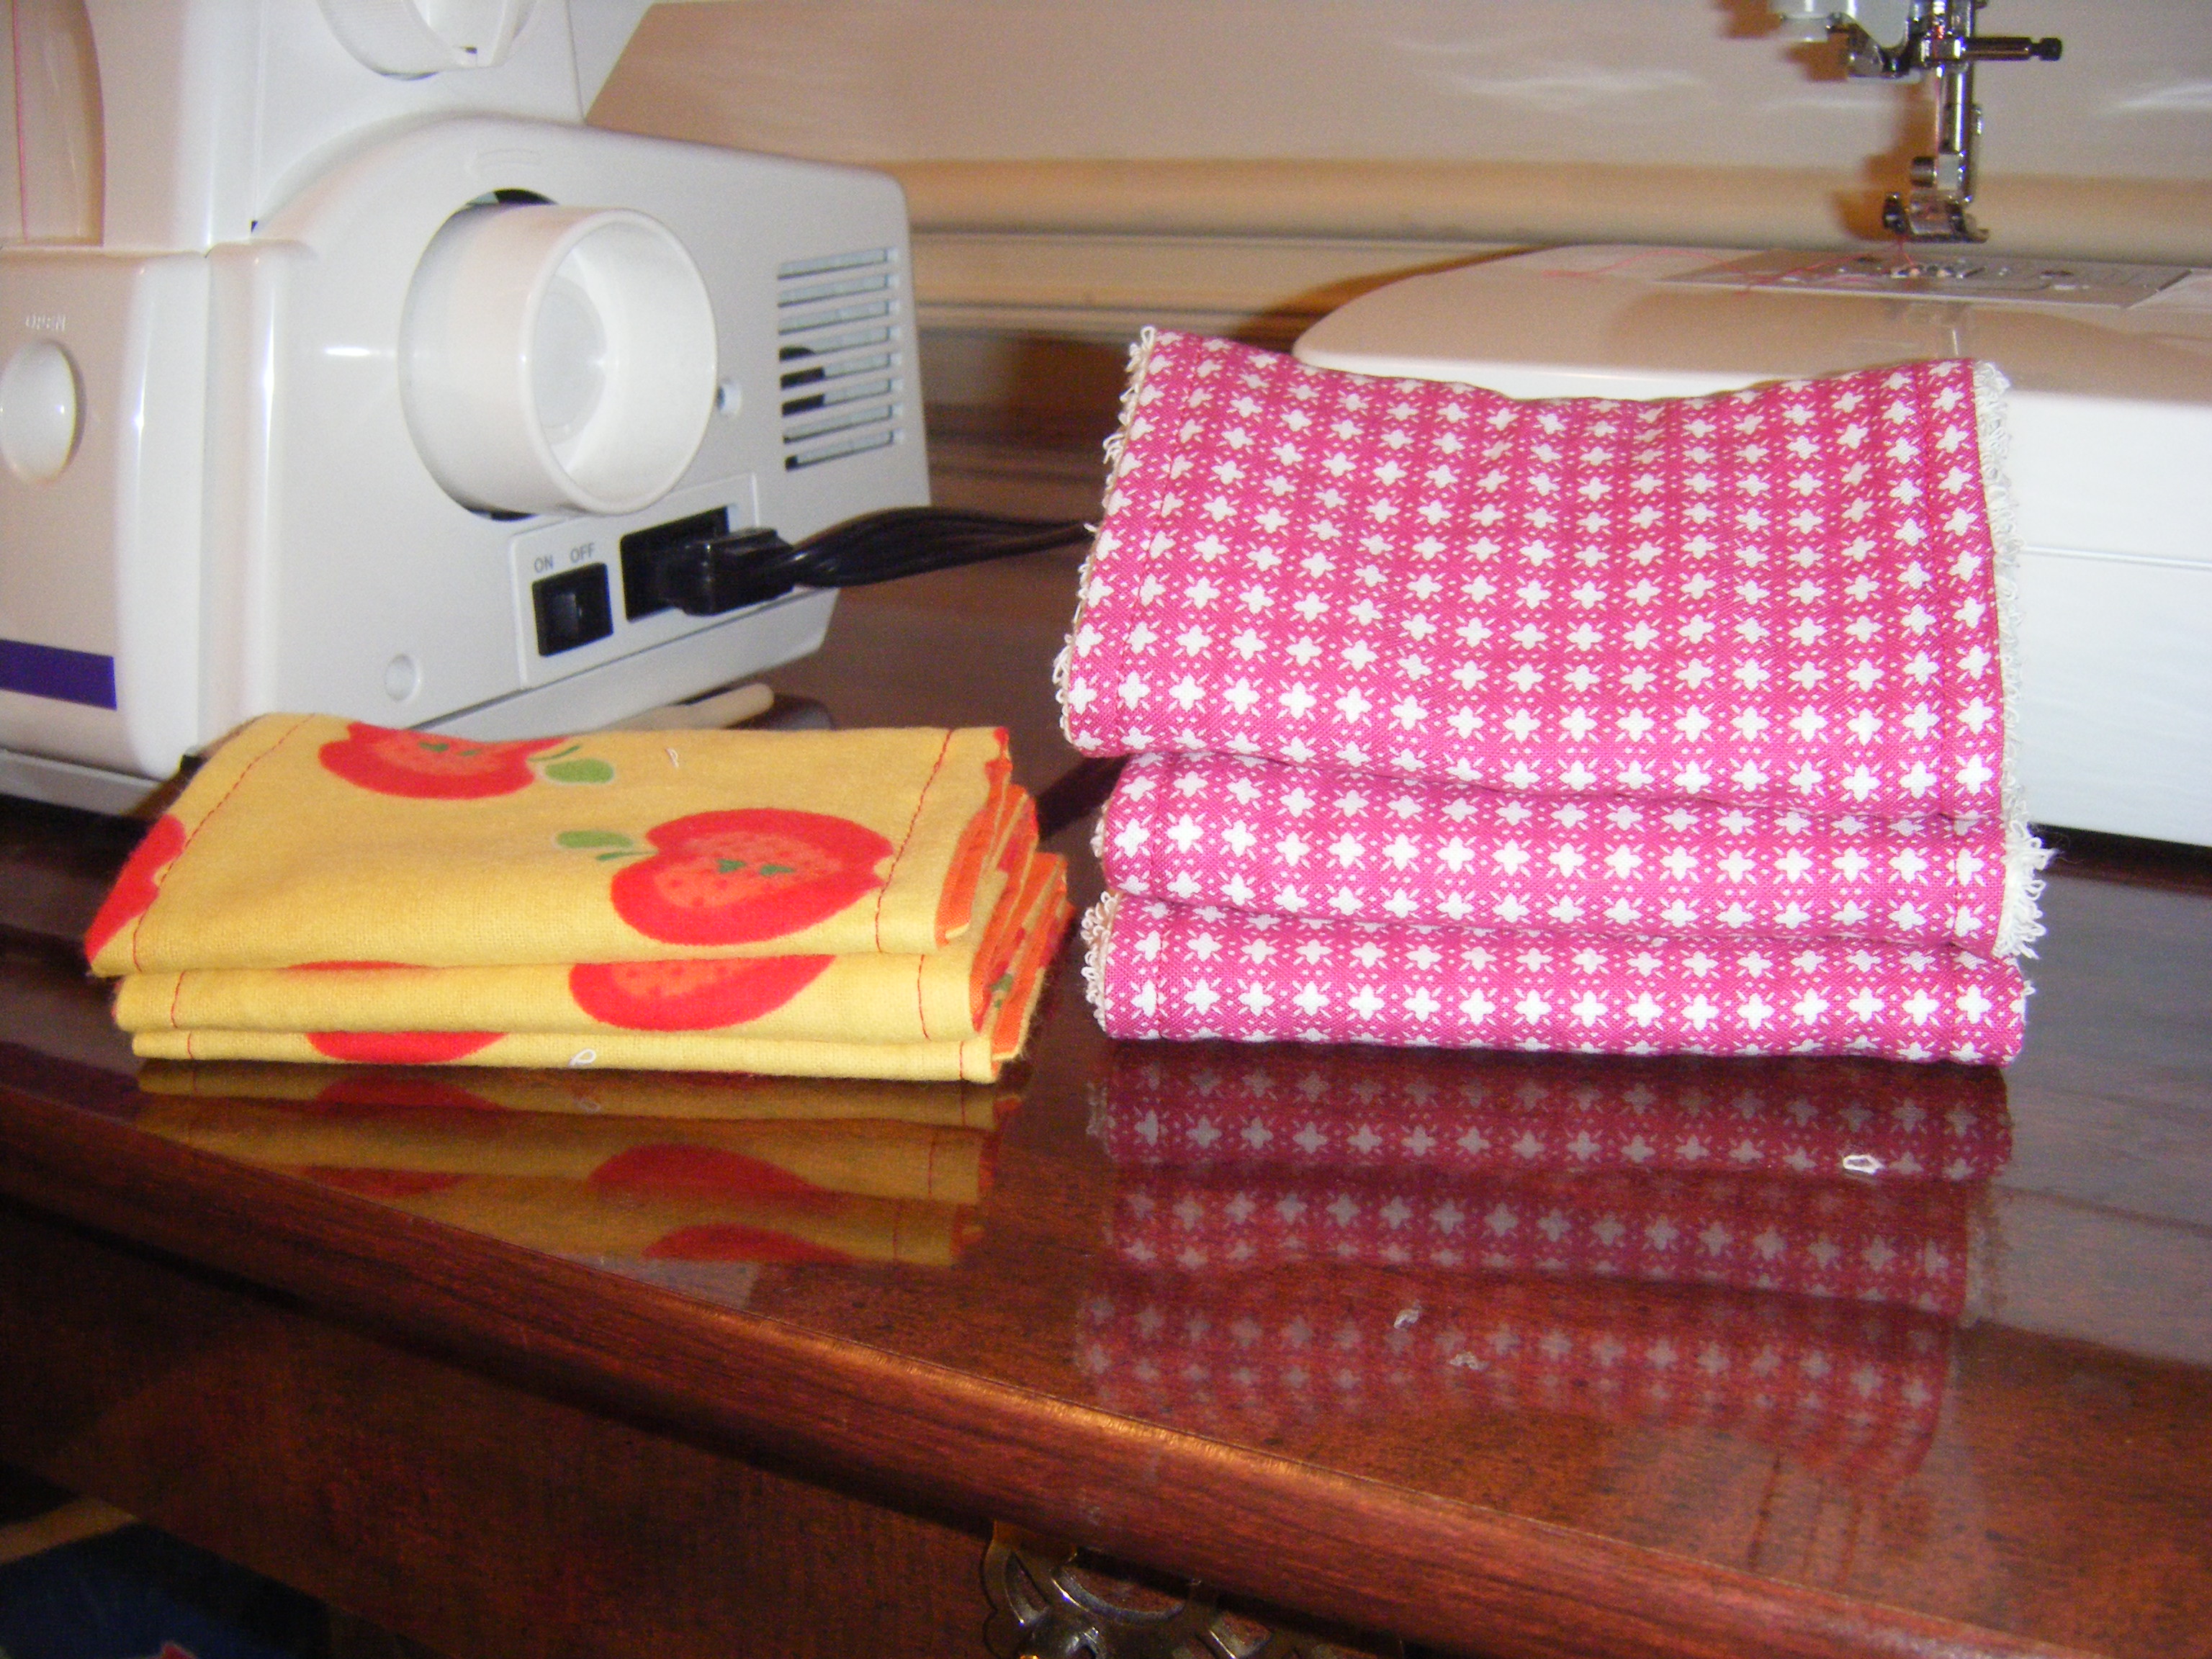 Two stacks of diy burp cloths showing the difference between the thickness of Terry cloth vs. flannel.